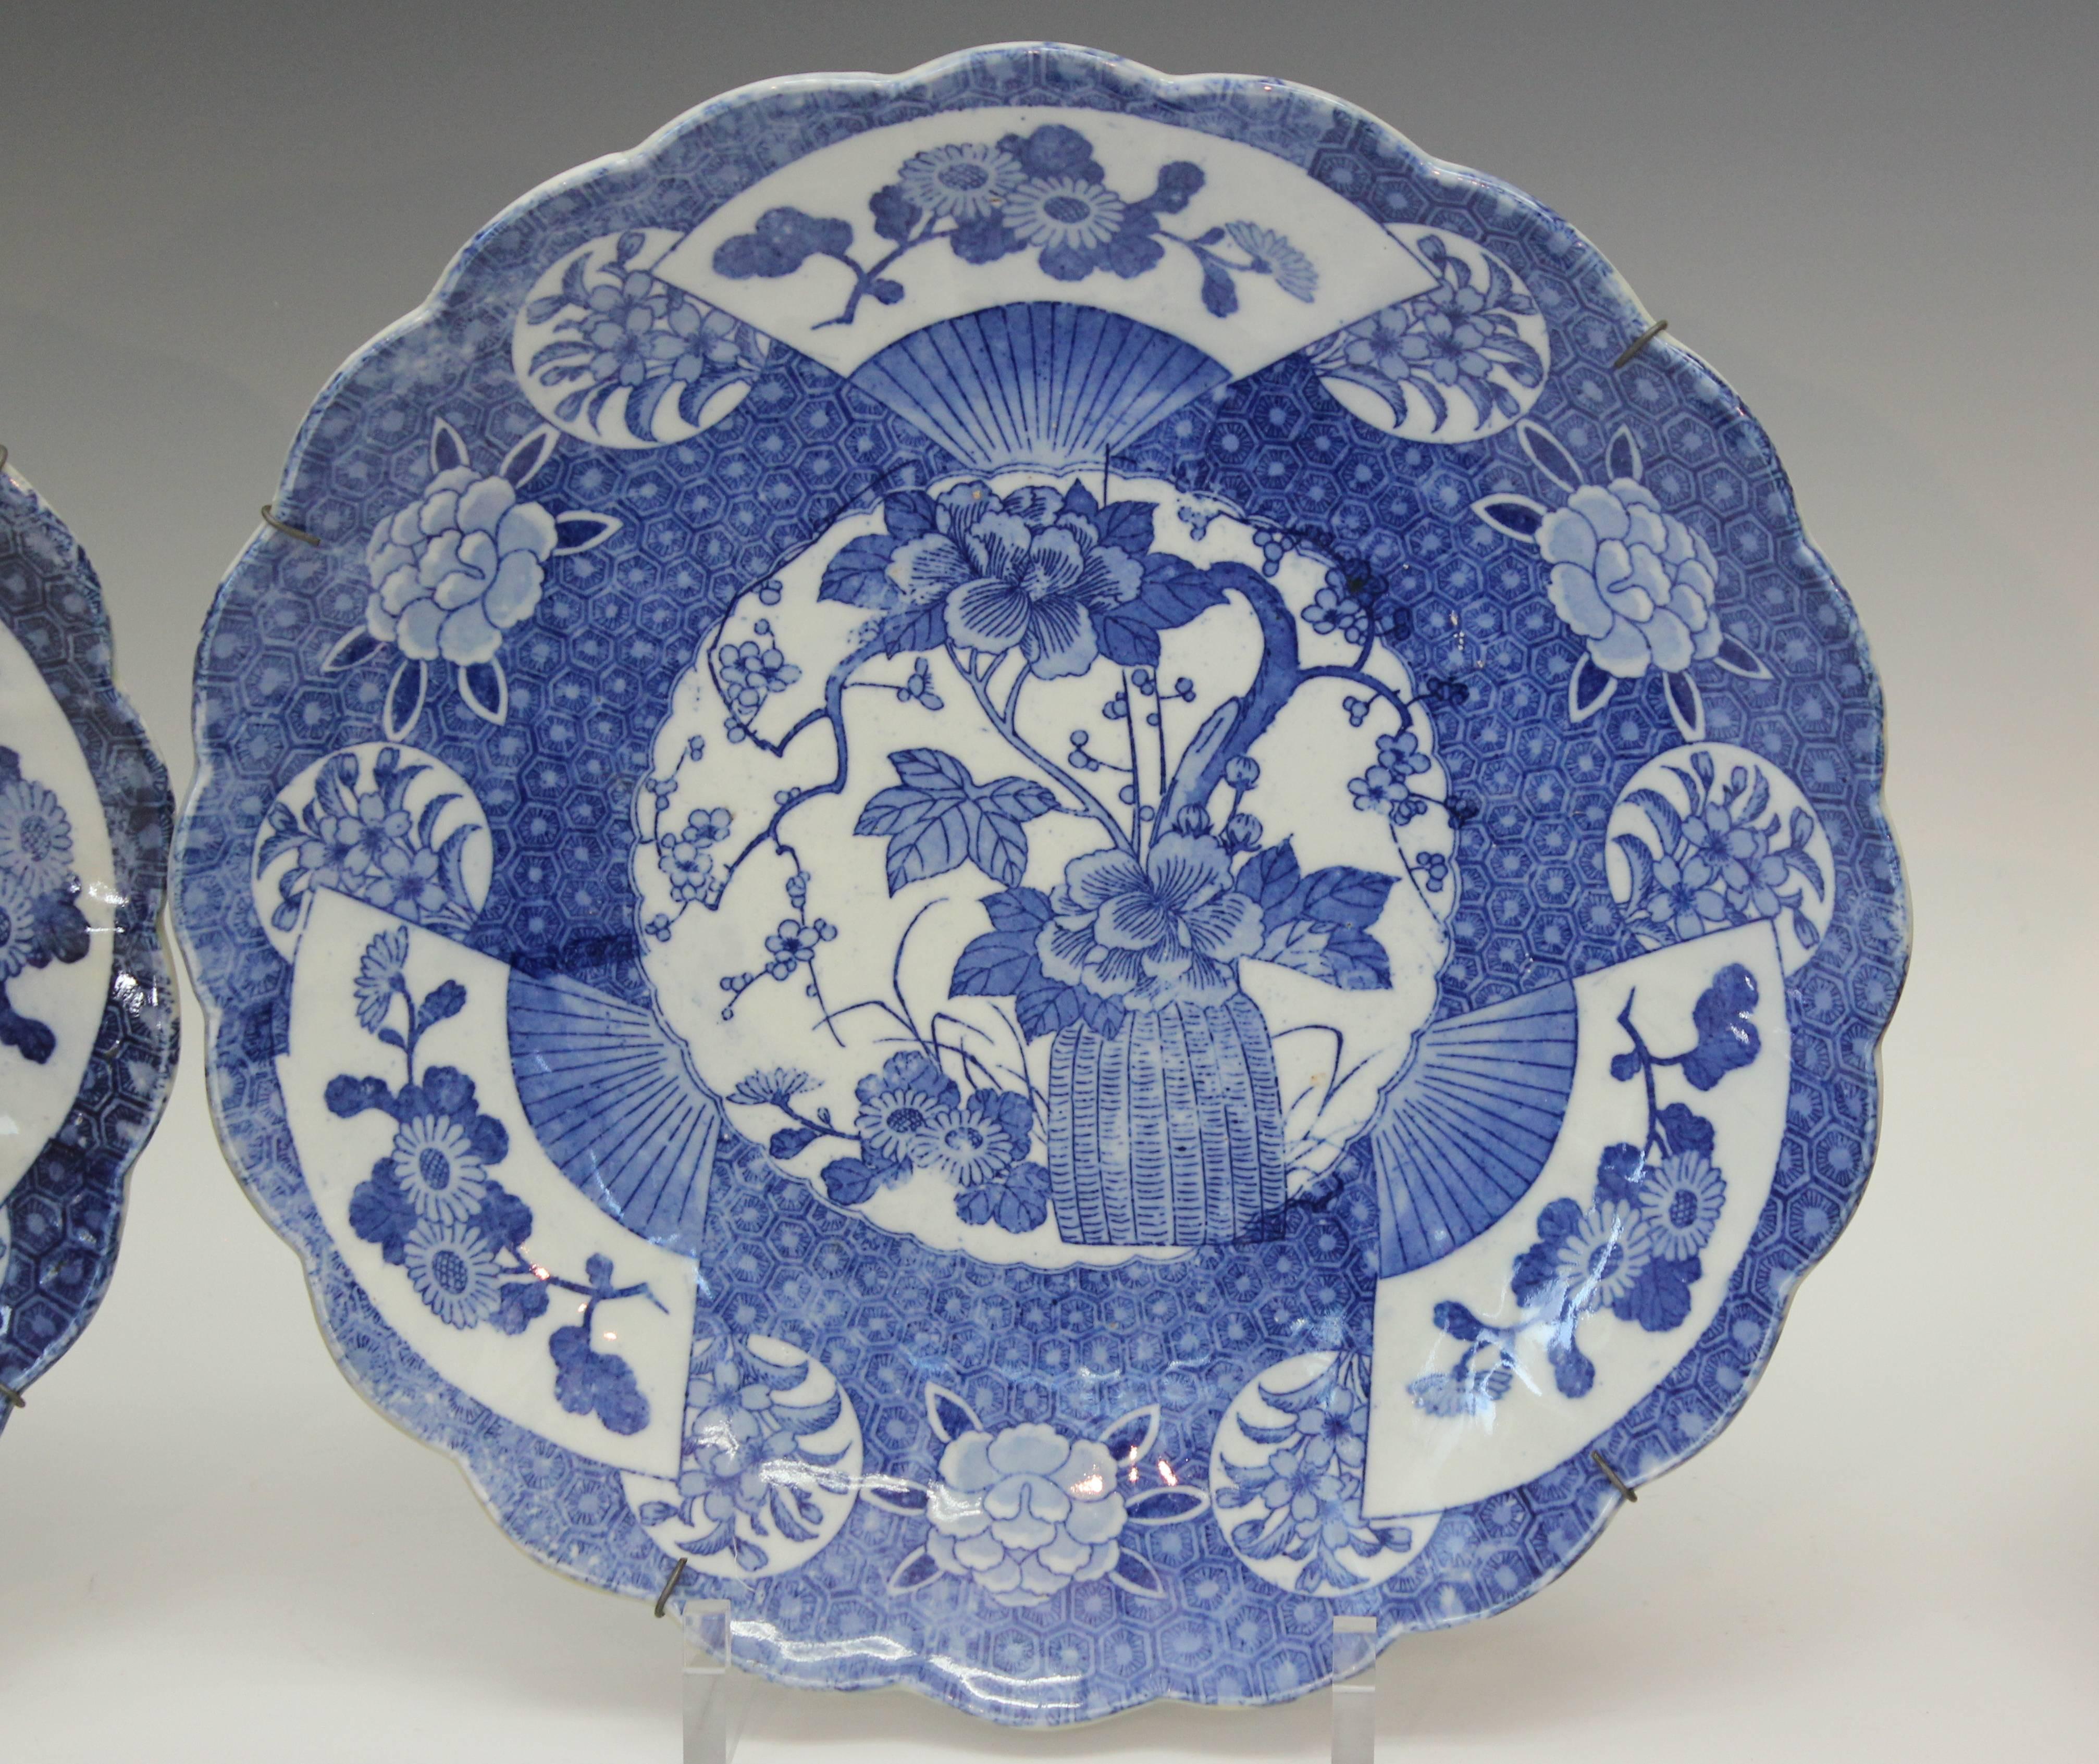 Meiji Pair Antique Japanese Porcelain Blue & White Transfer Foliated Chargers